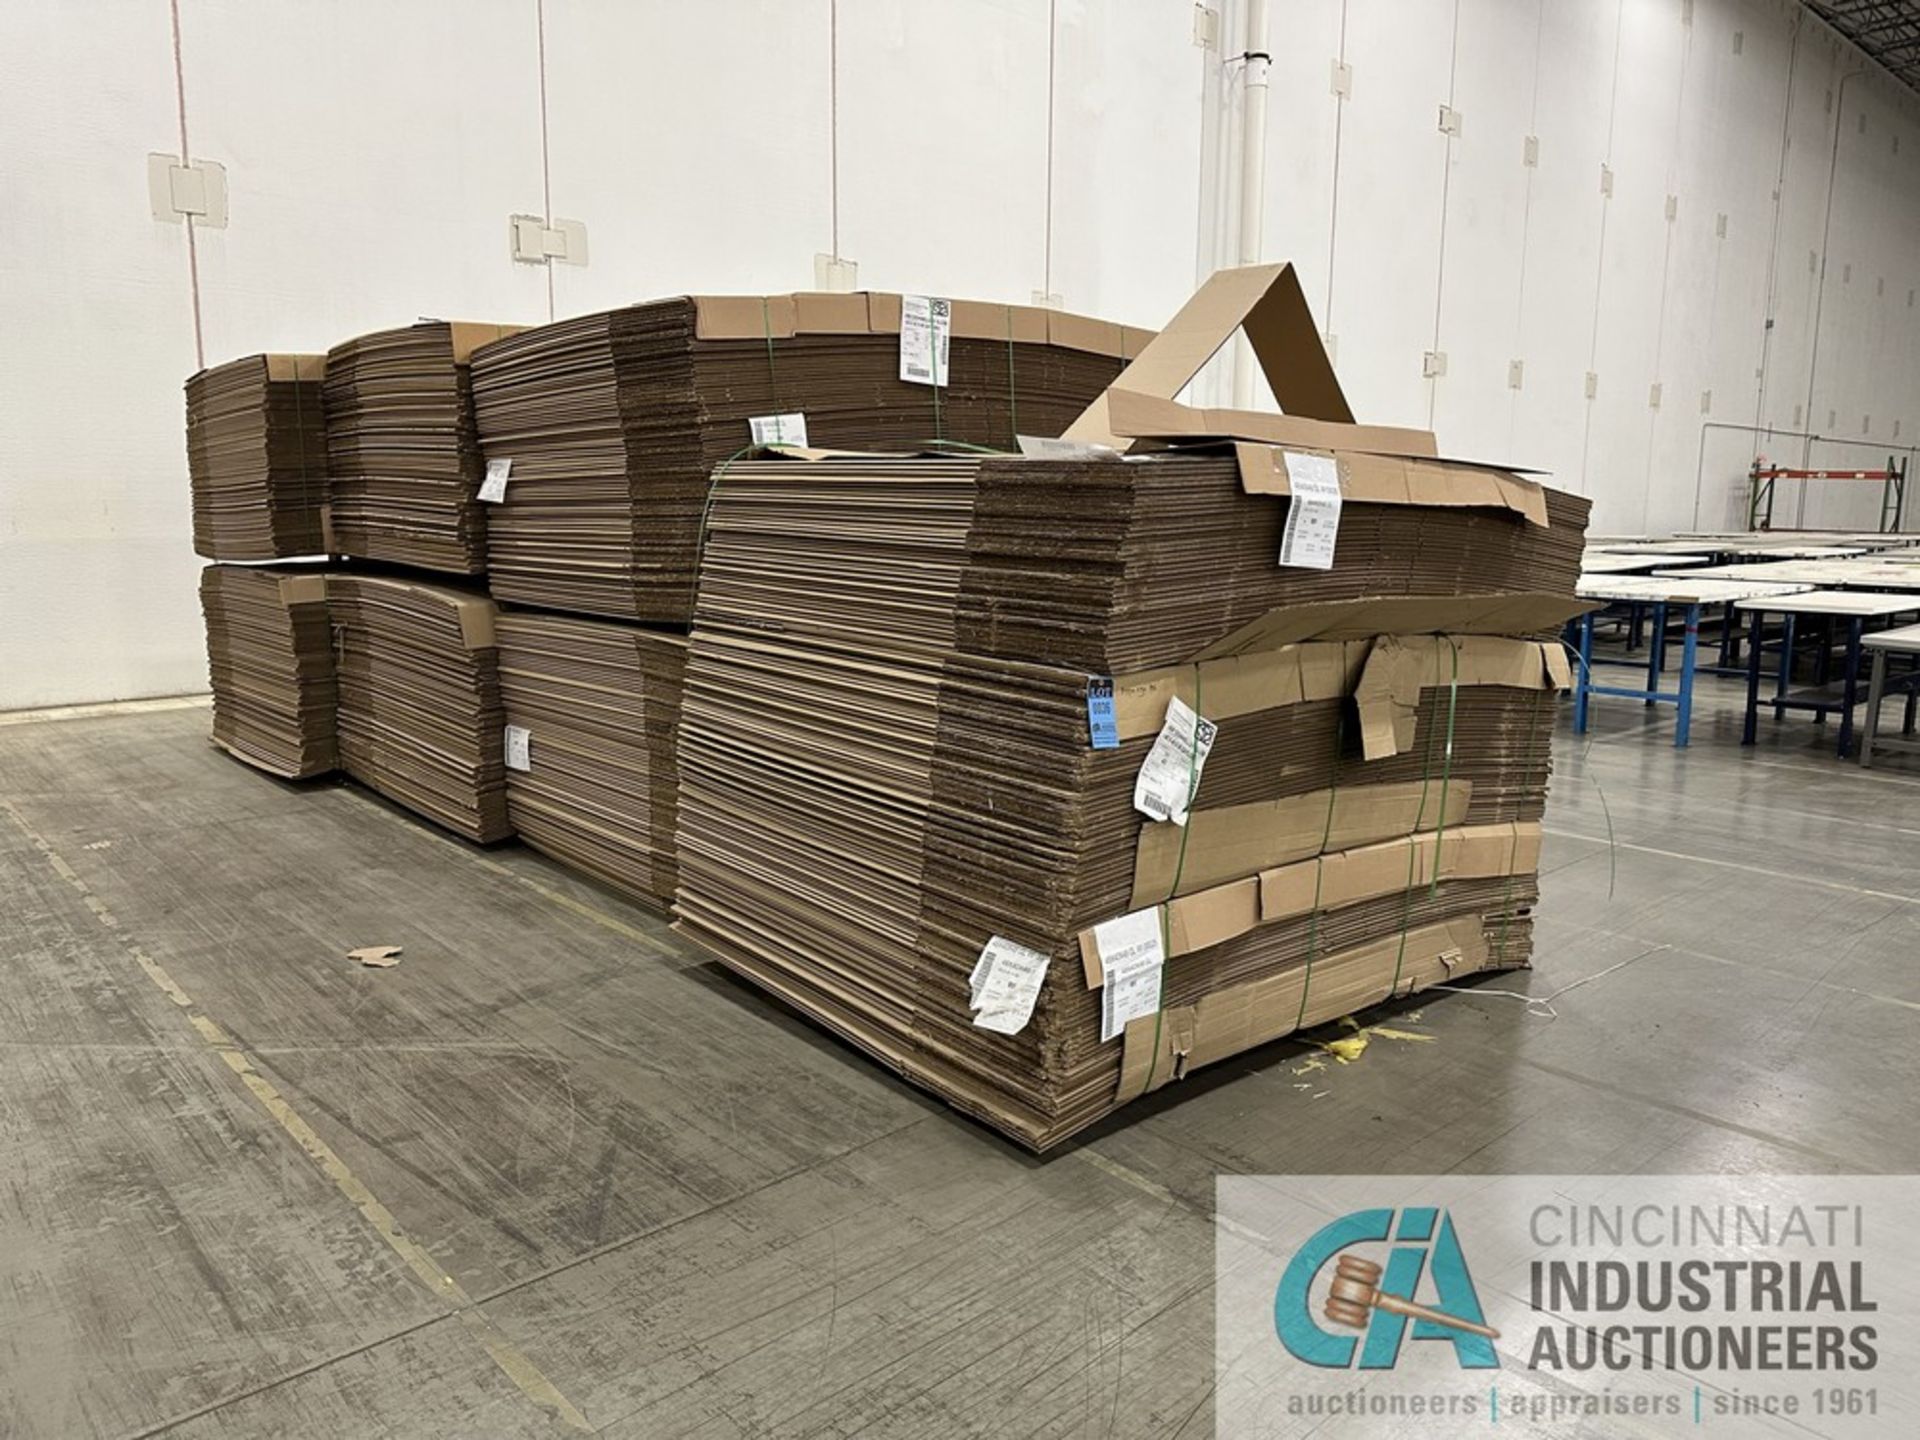 (LOT) 4 SKIDS OF 48" X 40" X 48" GAYLORD BOXES APPROX. 550 TOTAL PCS **$250.00 LOADING FEE**